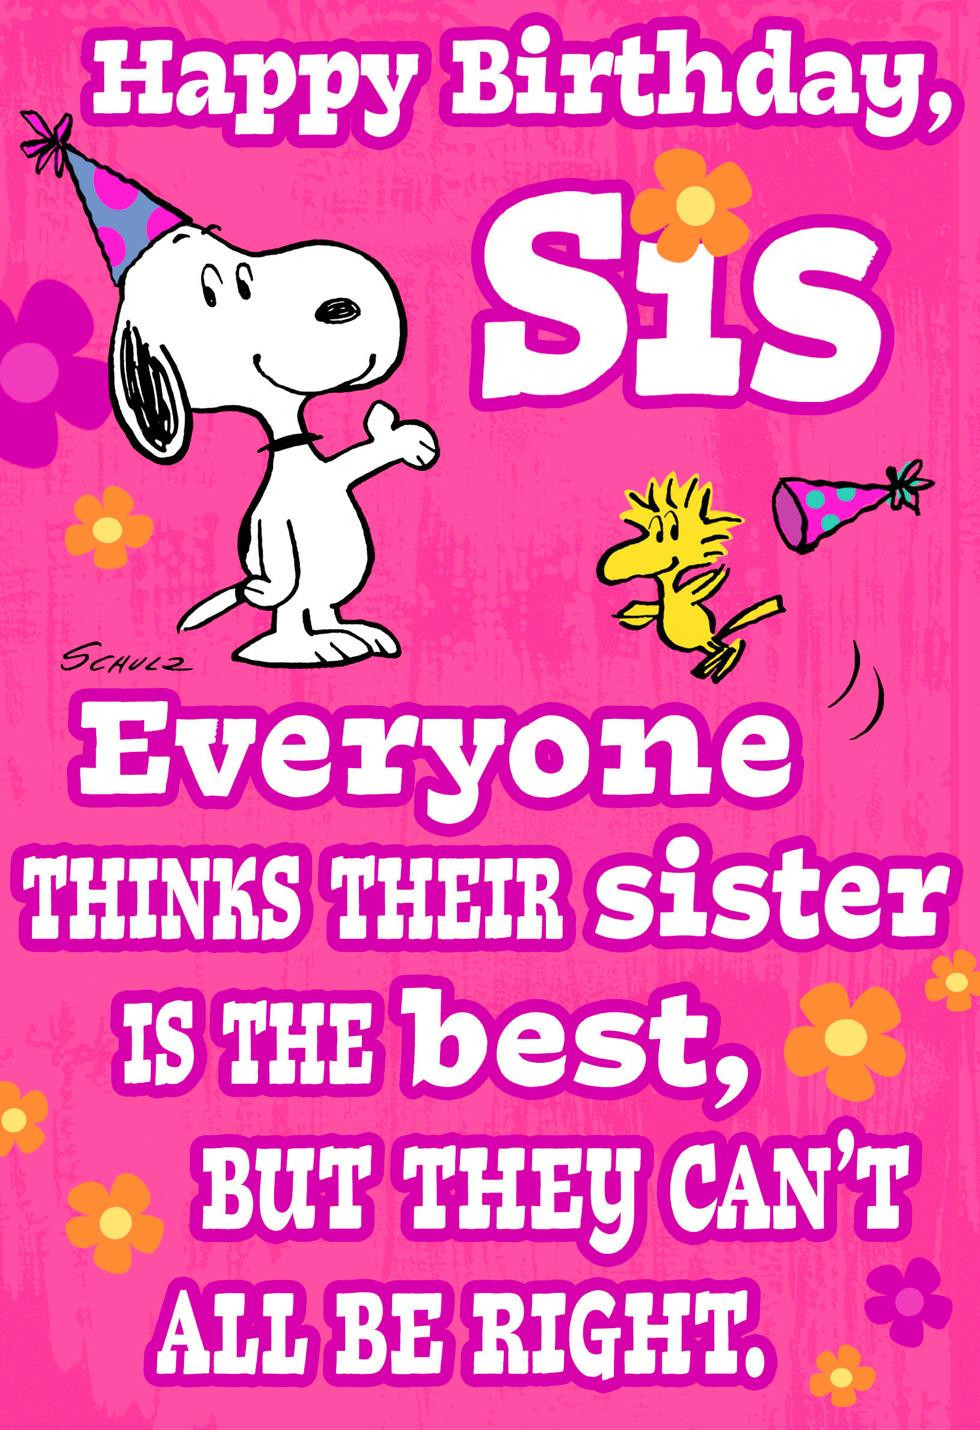 Funny Birthday Card For Sister
 Peanuts Snoopy and Woodstock Best Sister Funny Birthday